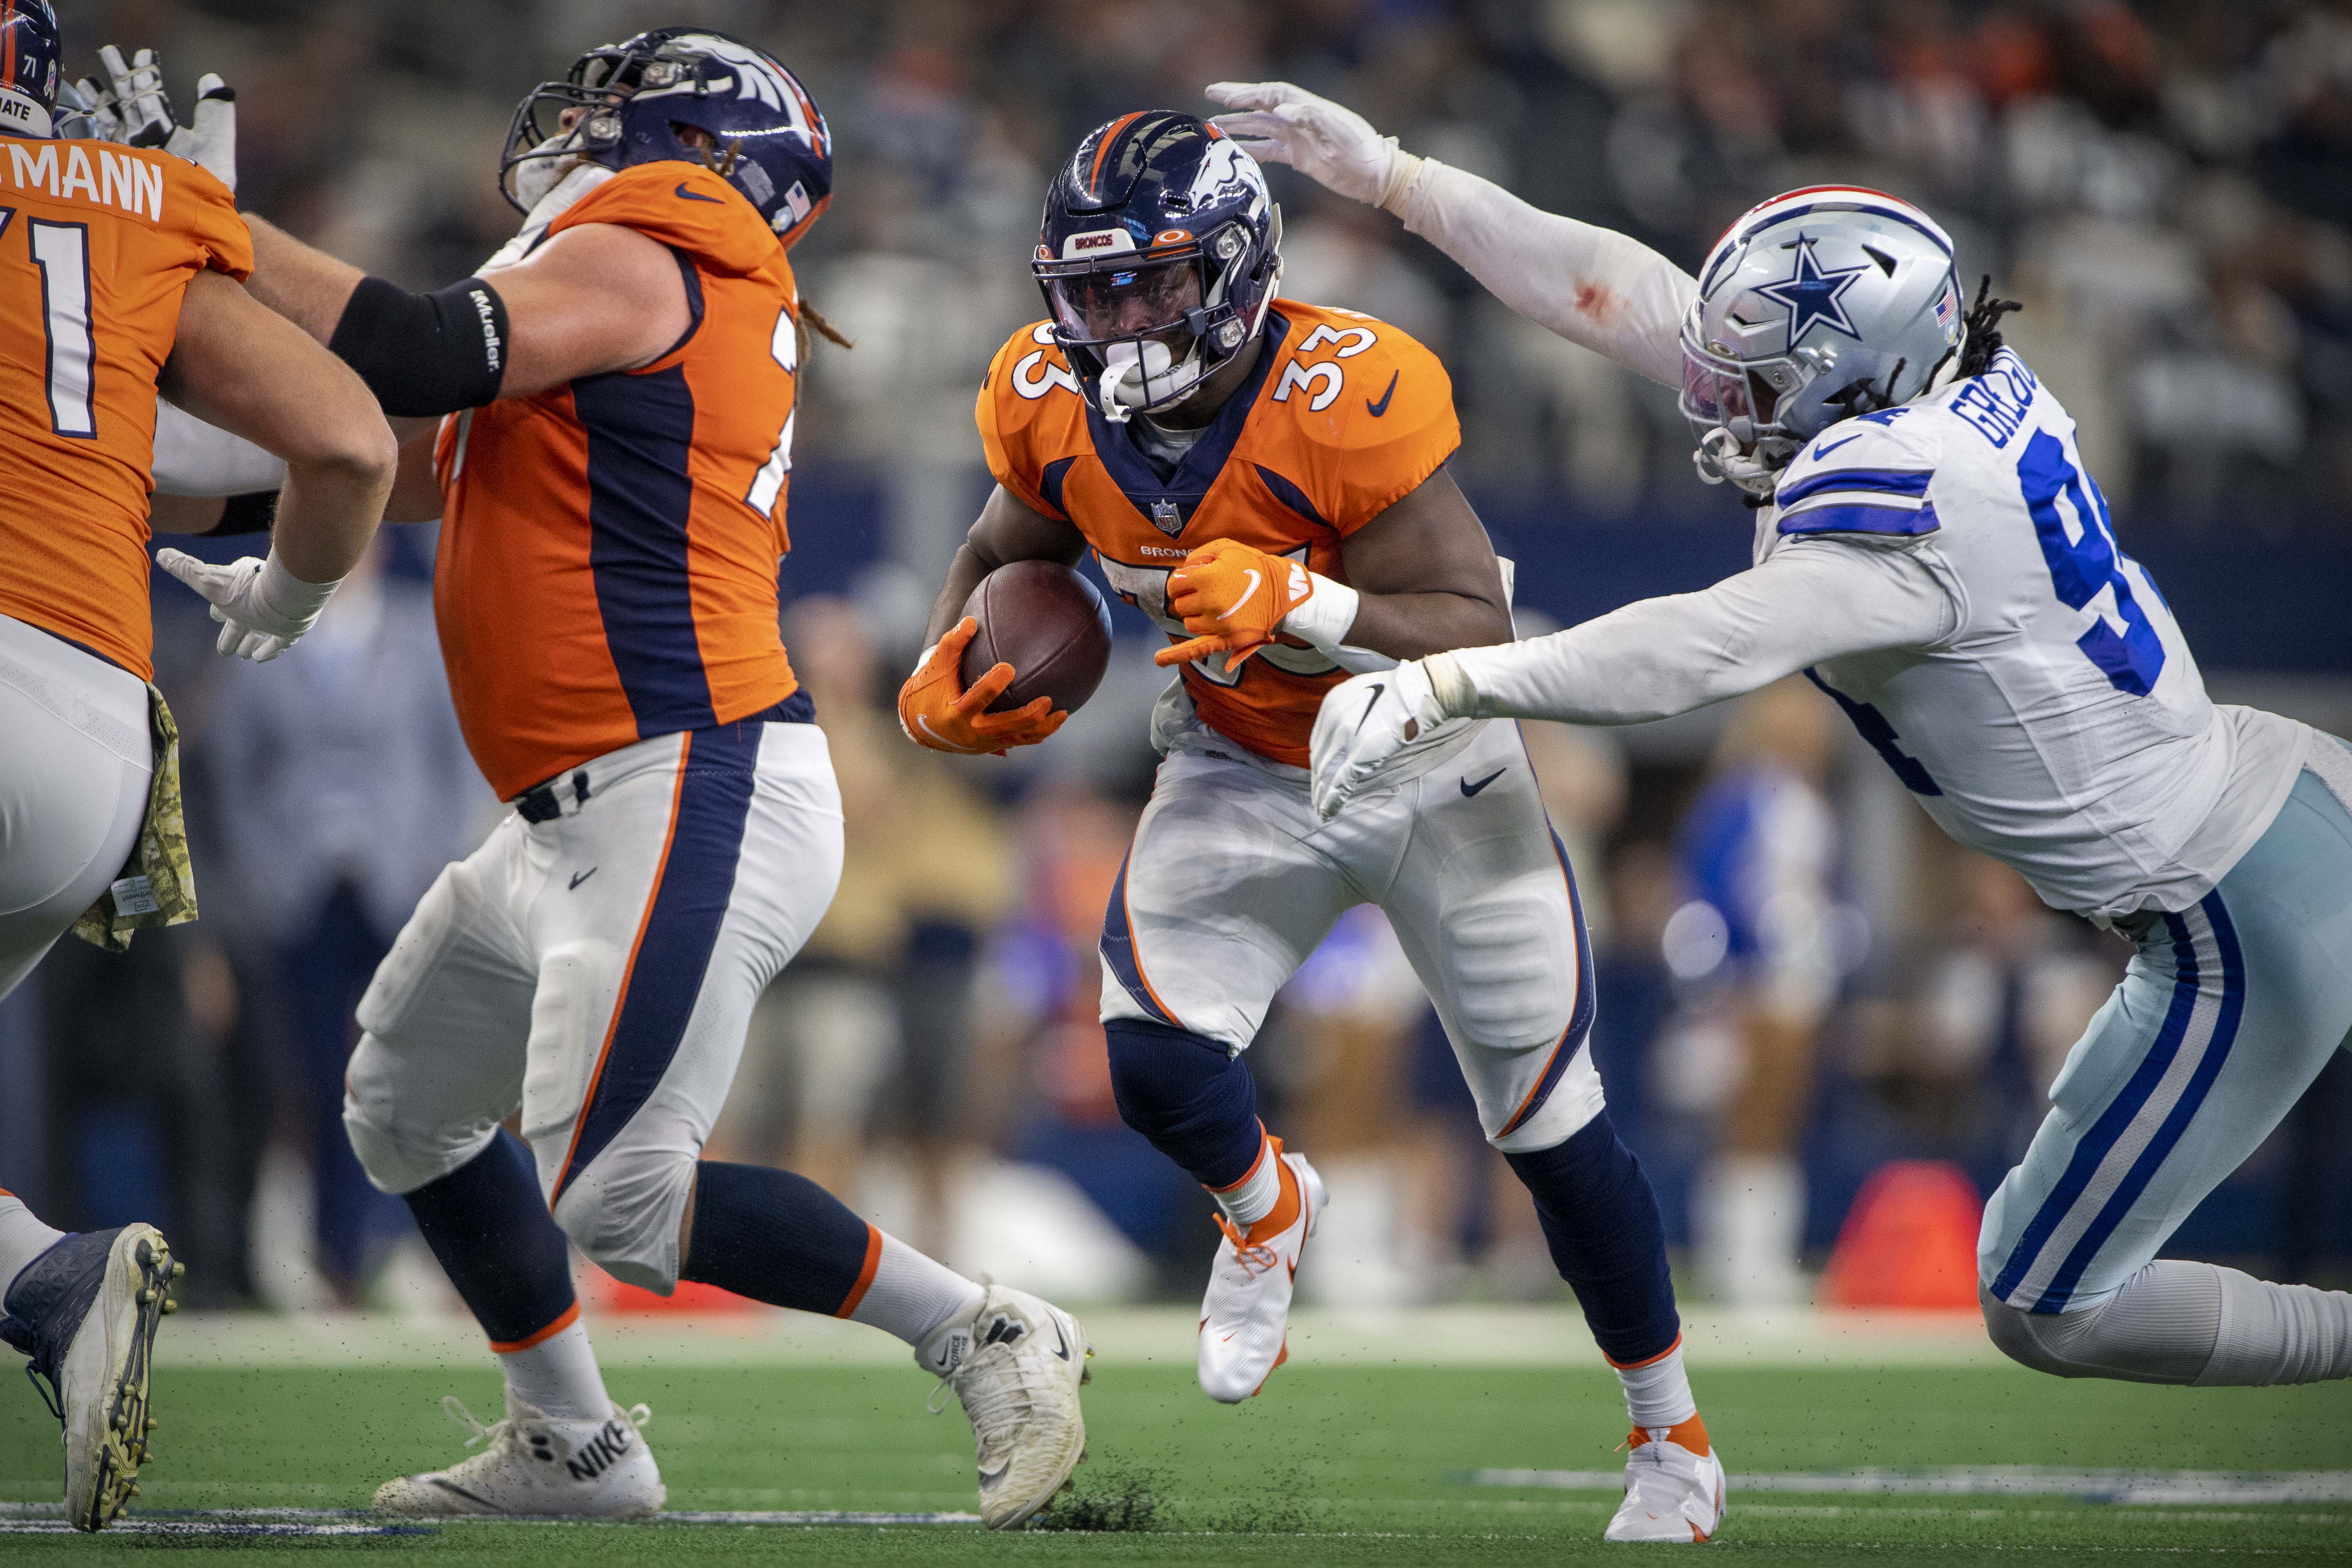 Denver Broncos running back Javonte Williams (33) tries to elude Dallas Cowboys defensive end Randy Gregory (94) during the second half at AT&T Stadium.